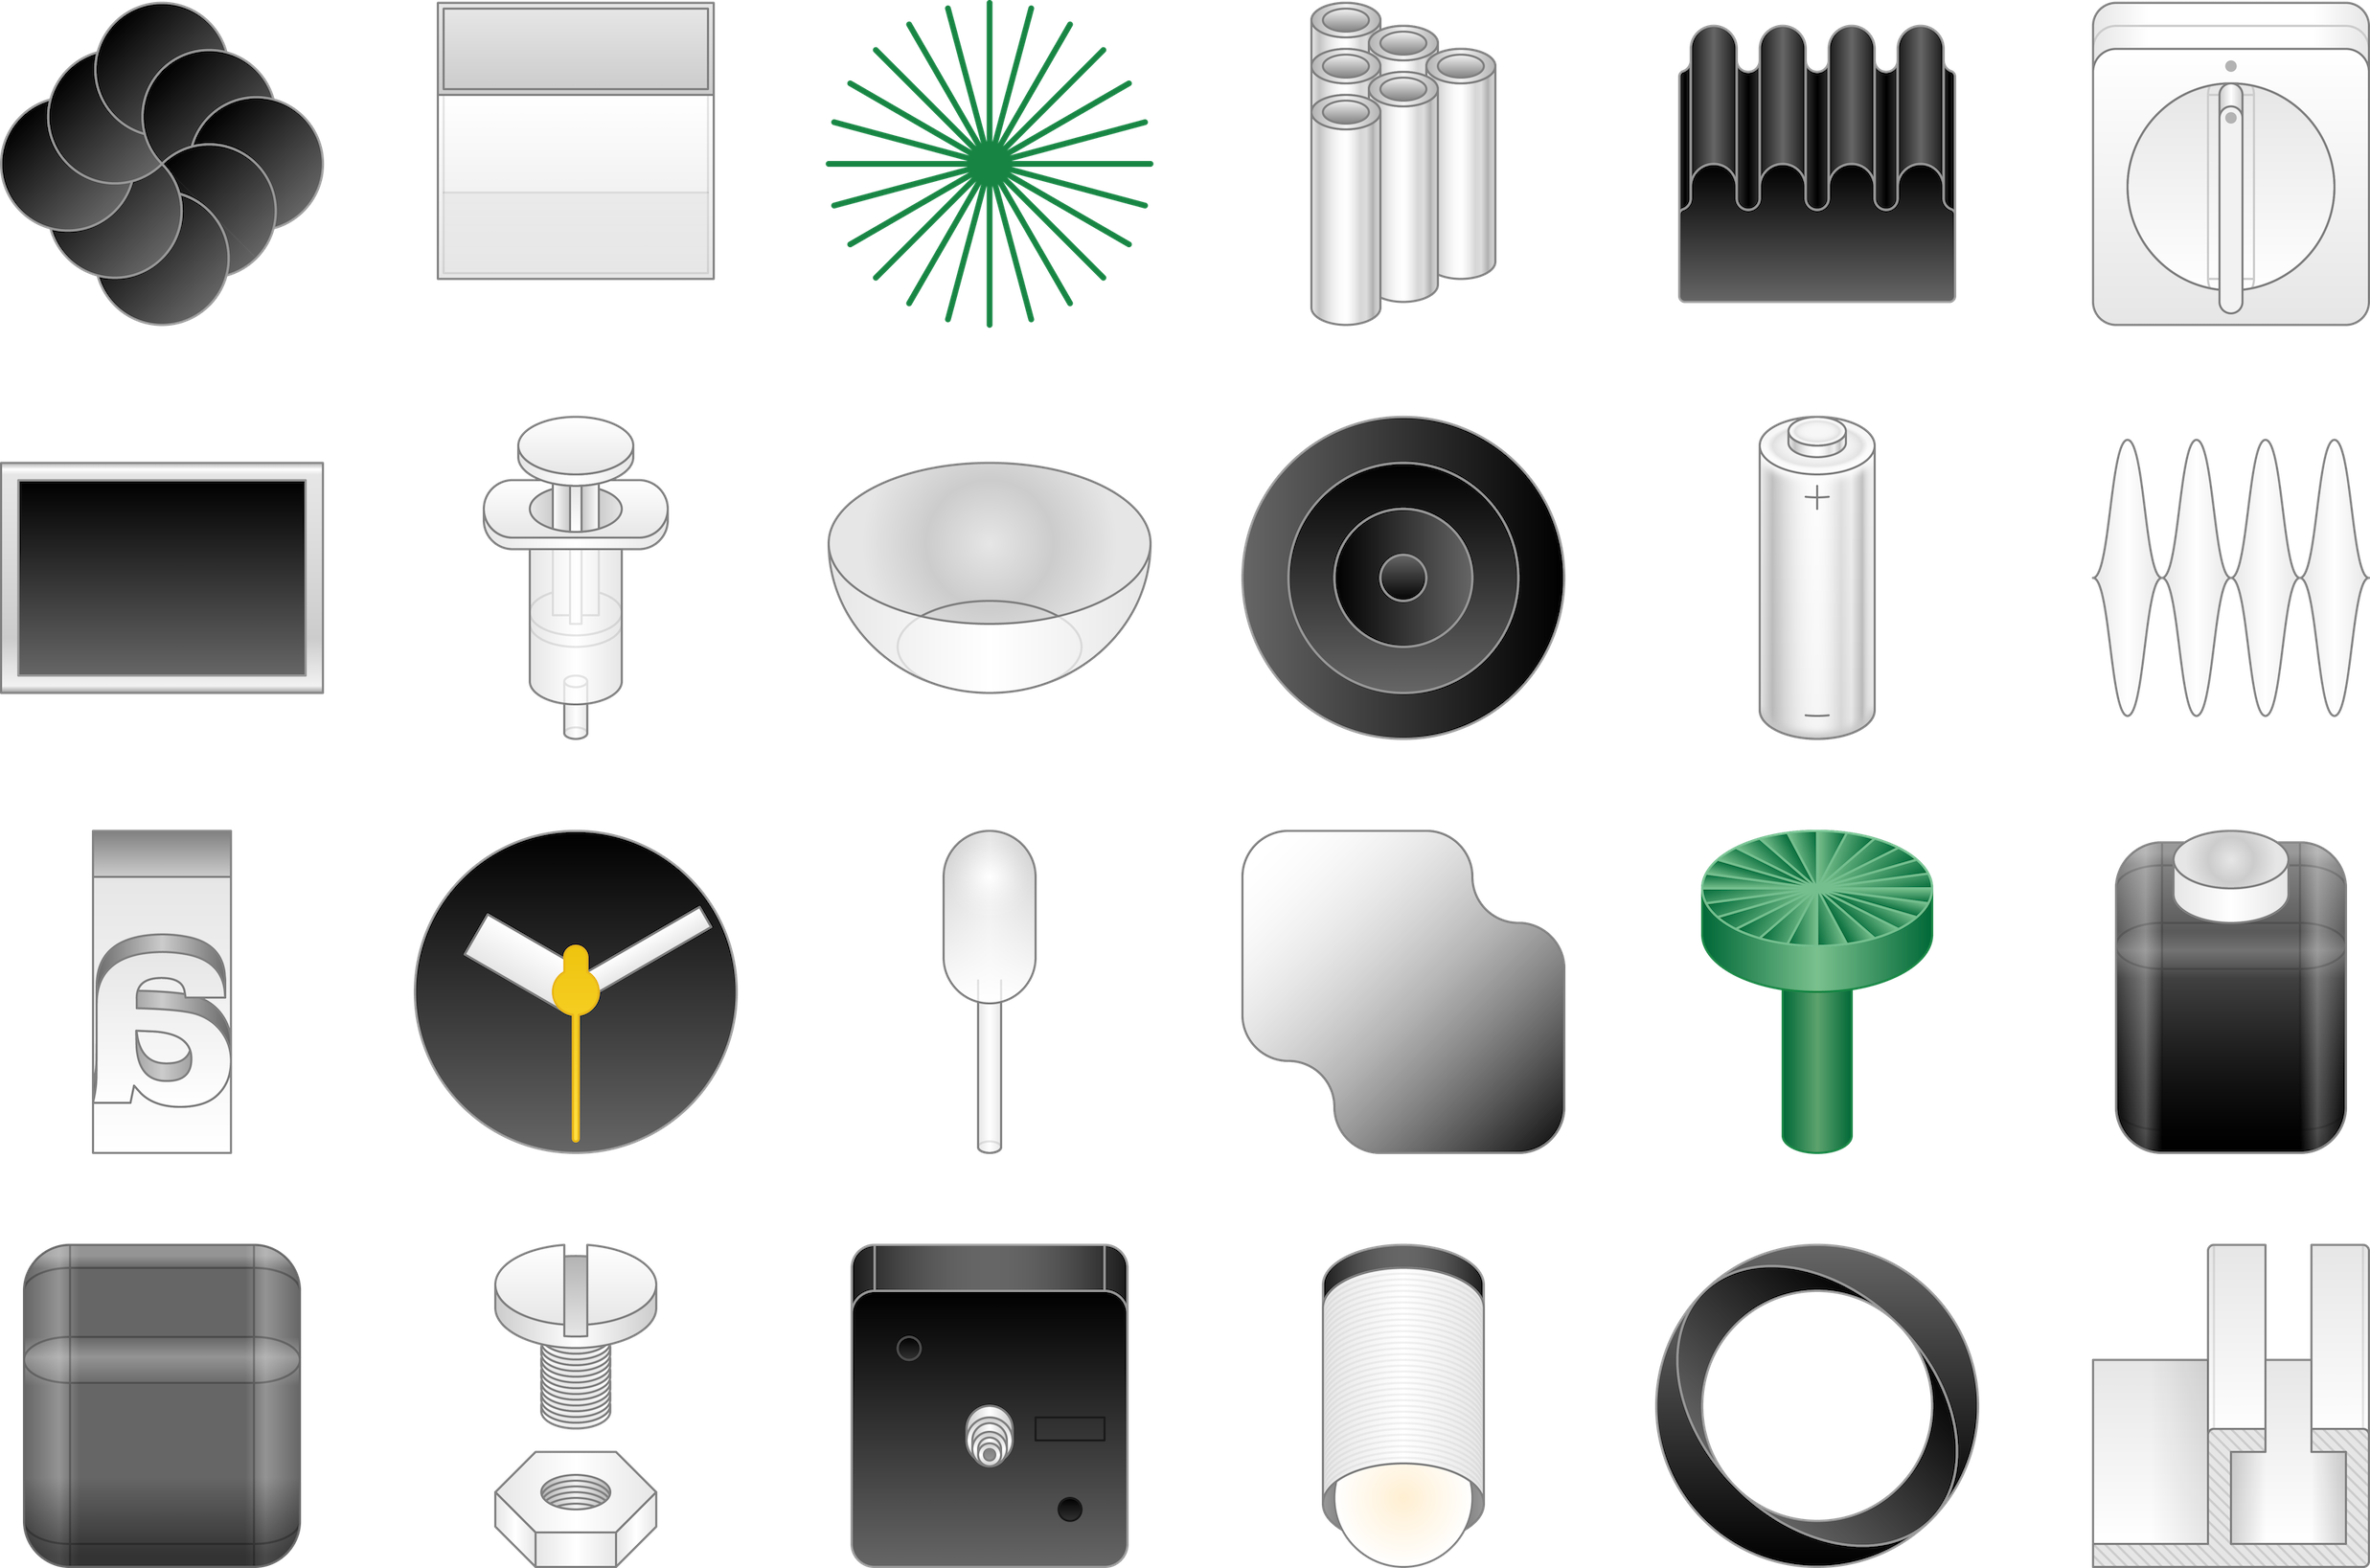 Icons depicting elements of the Meridiem project